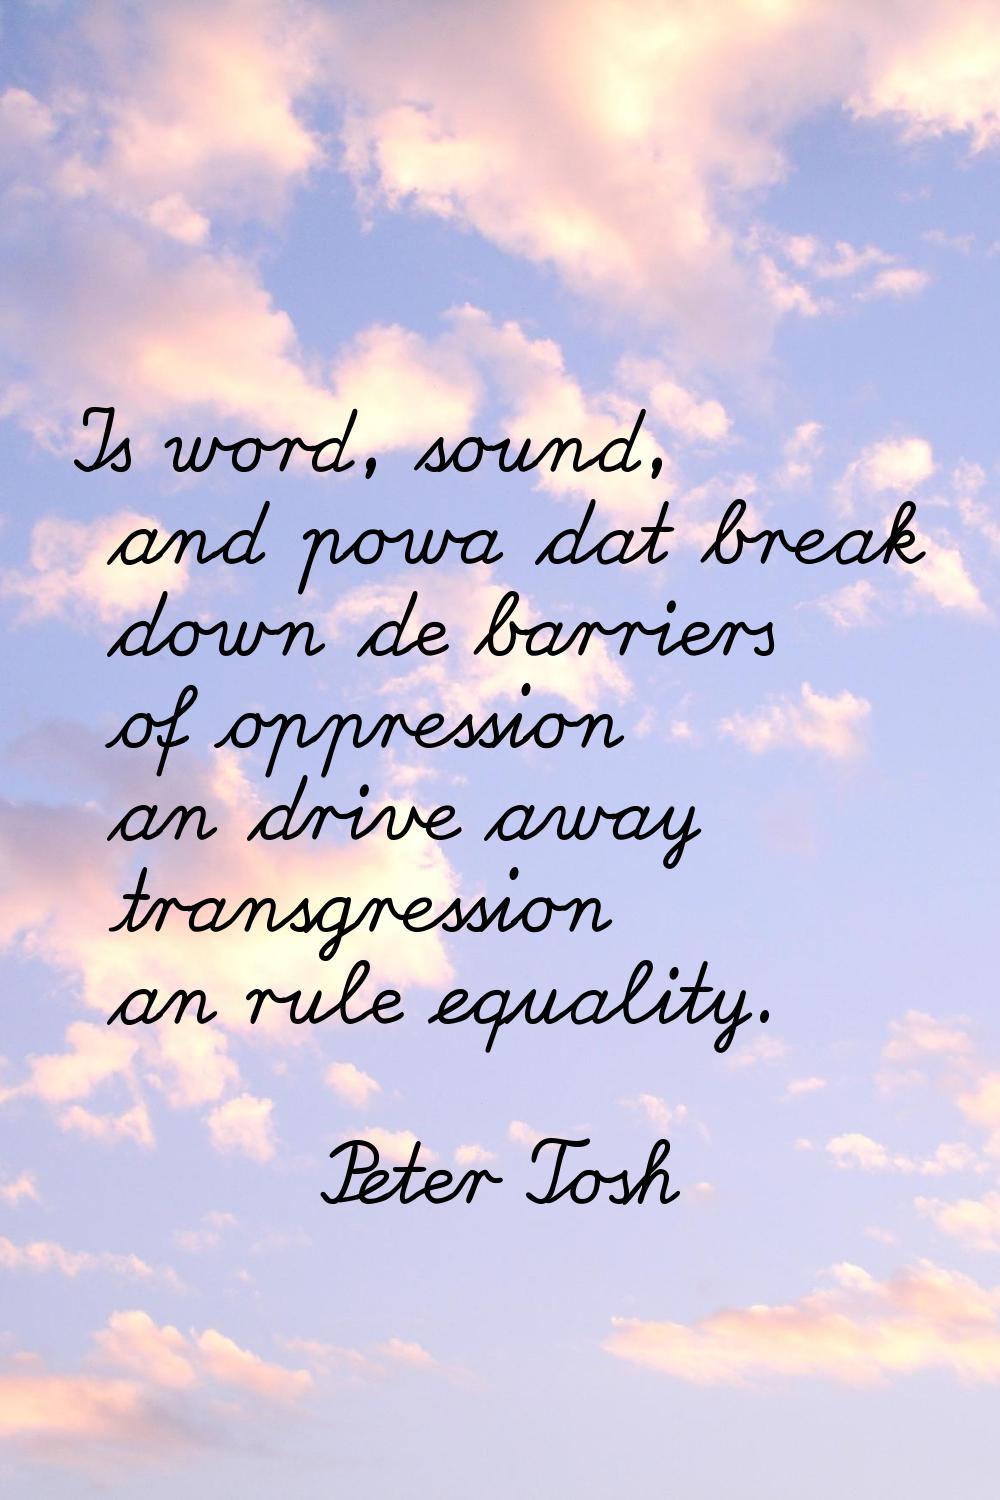 Is word, sound, and powa dat break down de barriers of oppression an drive away transgression an ru